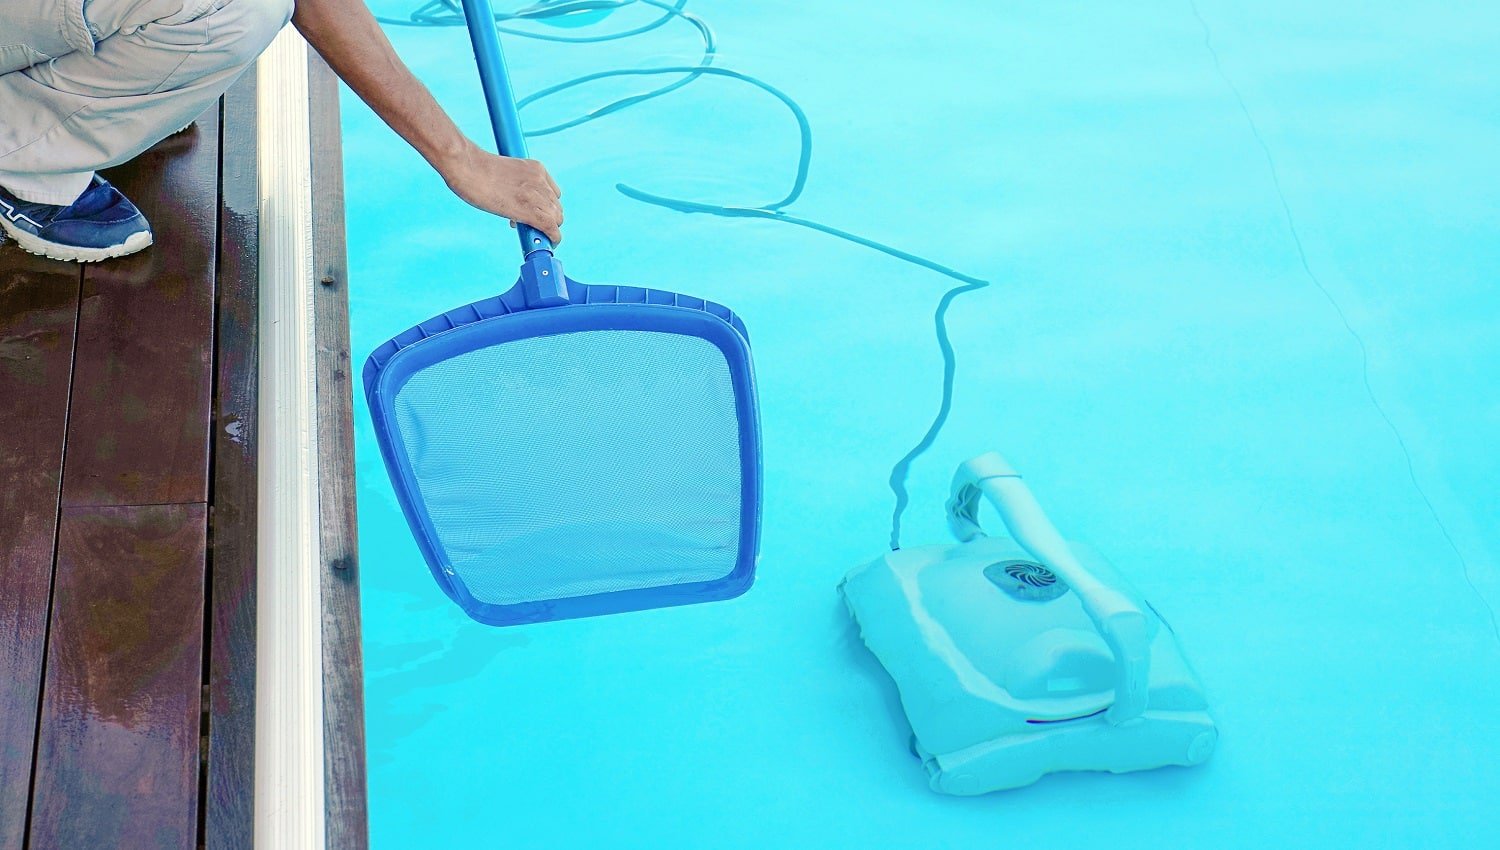 Pool cleaner during his work. Cleaning robot for cleaning the botton of swimming pools. Automatic pool cleaners.